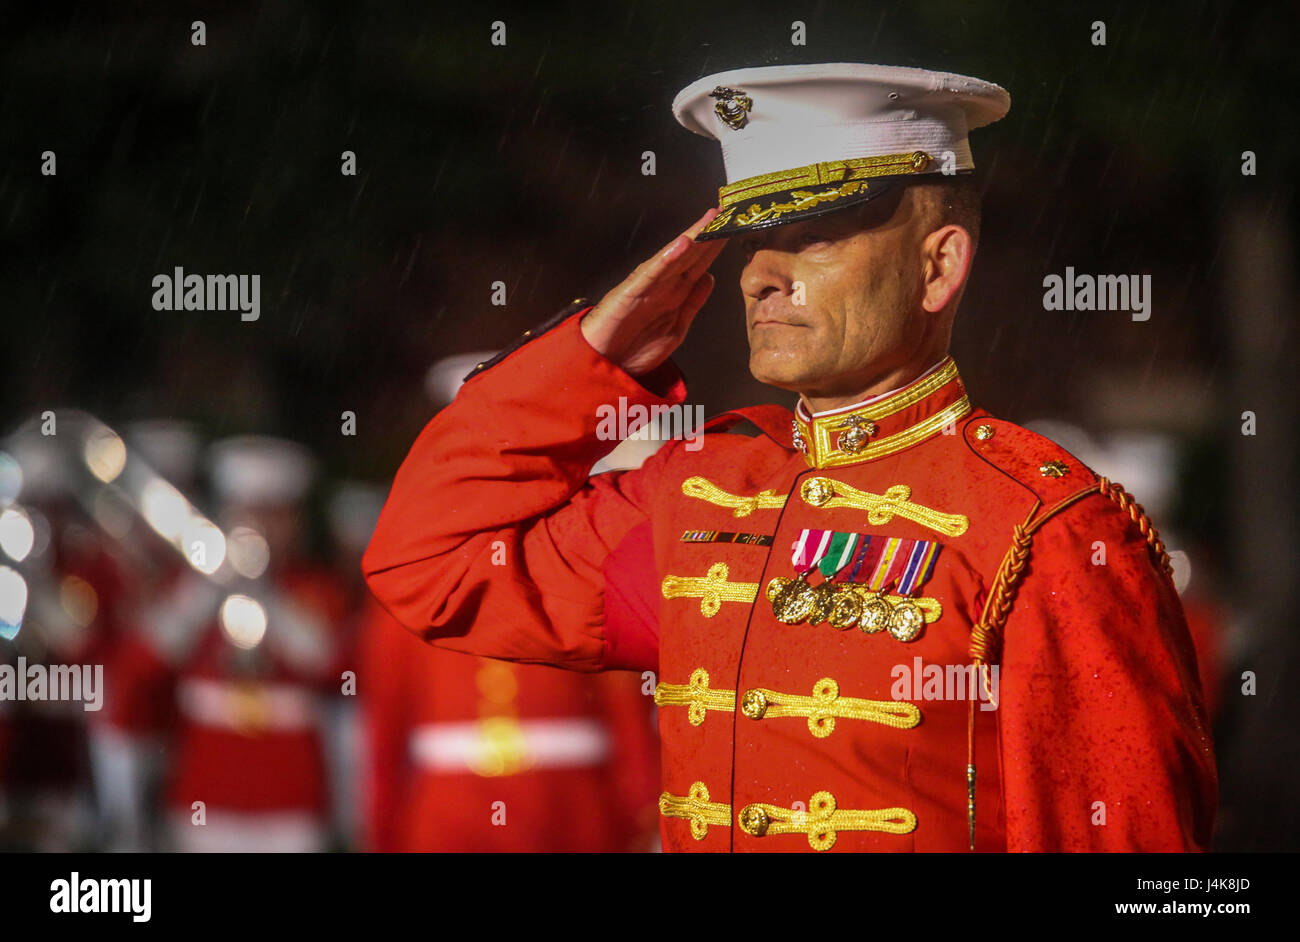 Major Christopher Hall, commanding officer, U.S. Marine Drum & Bugle Corps, salutes the parade commander during a Friday Evening Parade at Marine Barracks Washington D.C., May 5, 2017. The guests of honor for the parade were the Honorable Paul Cook, California’s 8th Congressional District Congressman, the Honorable Jack Bergman, Michigan’s 1st Congressional District Congressman, and the Honorable Salud Carbajal, California’s 24th Congressional District Congressman. The hosting official was Gen. Glenn Walters, assistant commandant of the Marine Corps.(Official Marine Corps photo by Lance Cpl. D Stock Photo